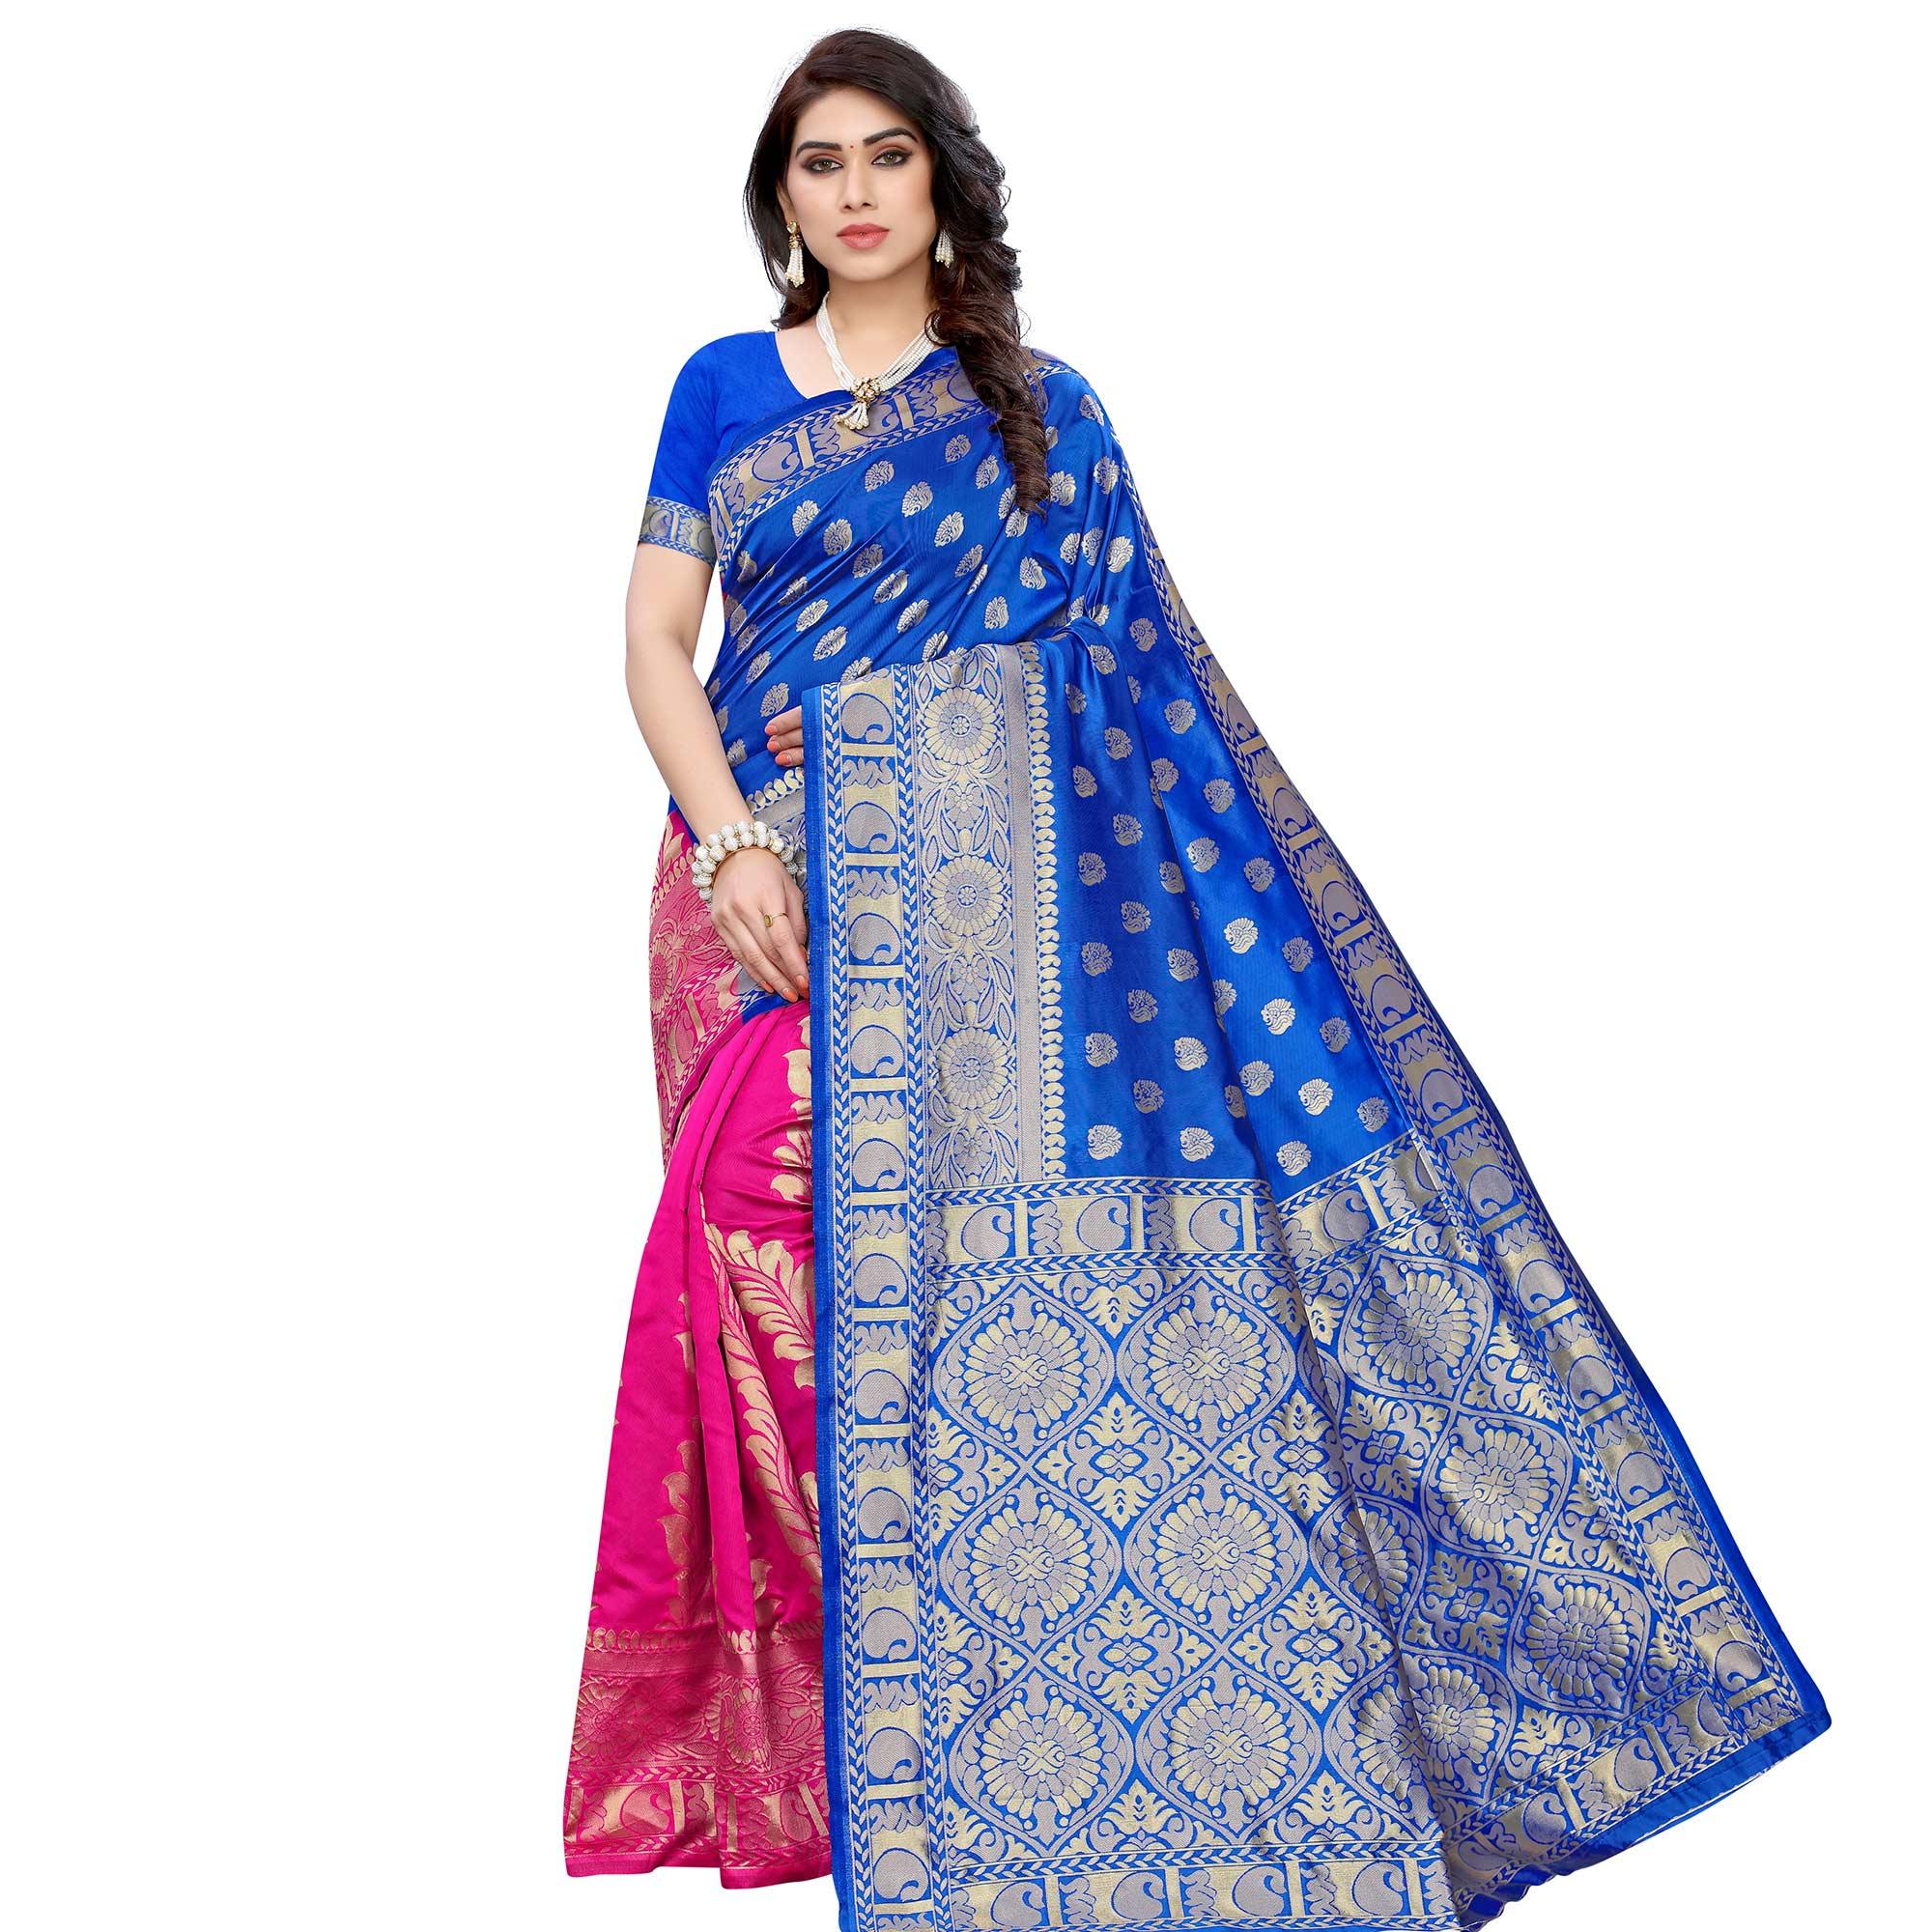 Exceptional Blue - Pink Colored Festive Wear Woven Jacquard Saree - Peachmode